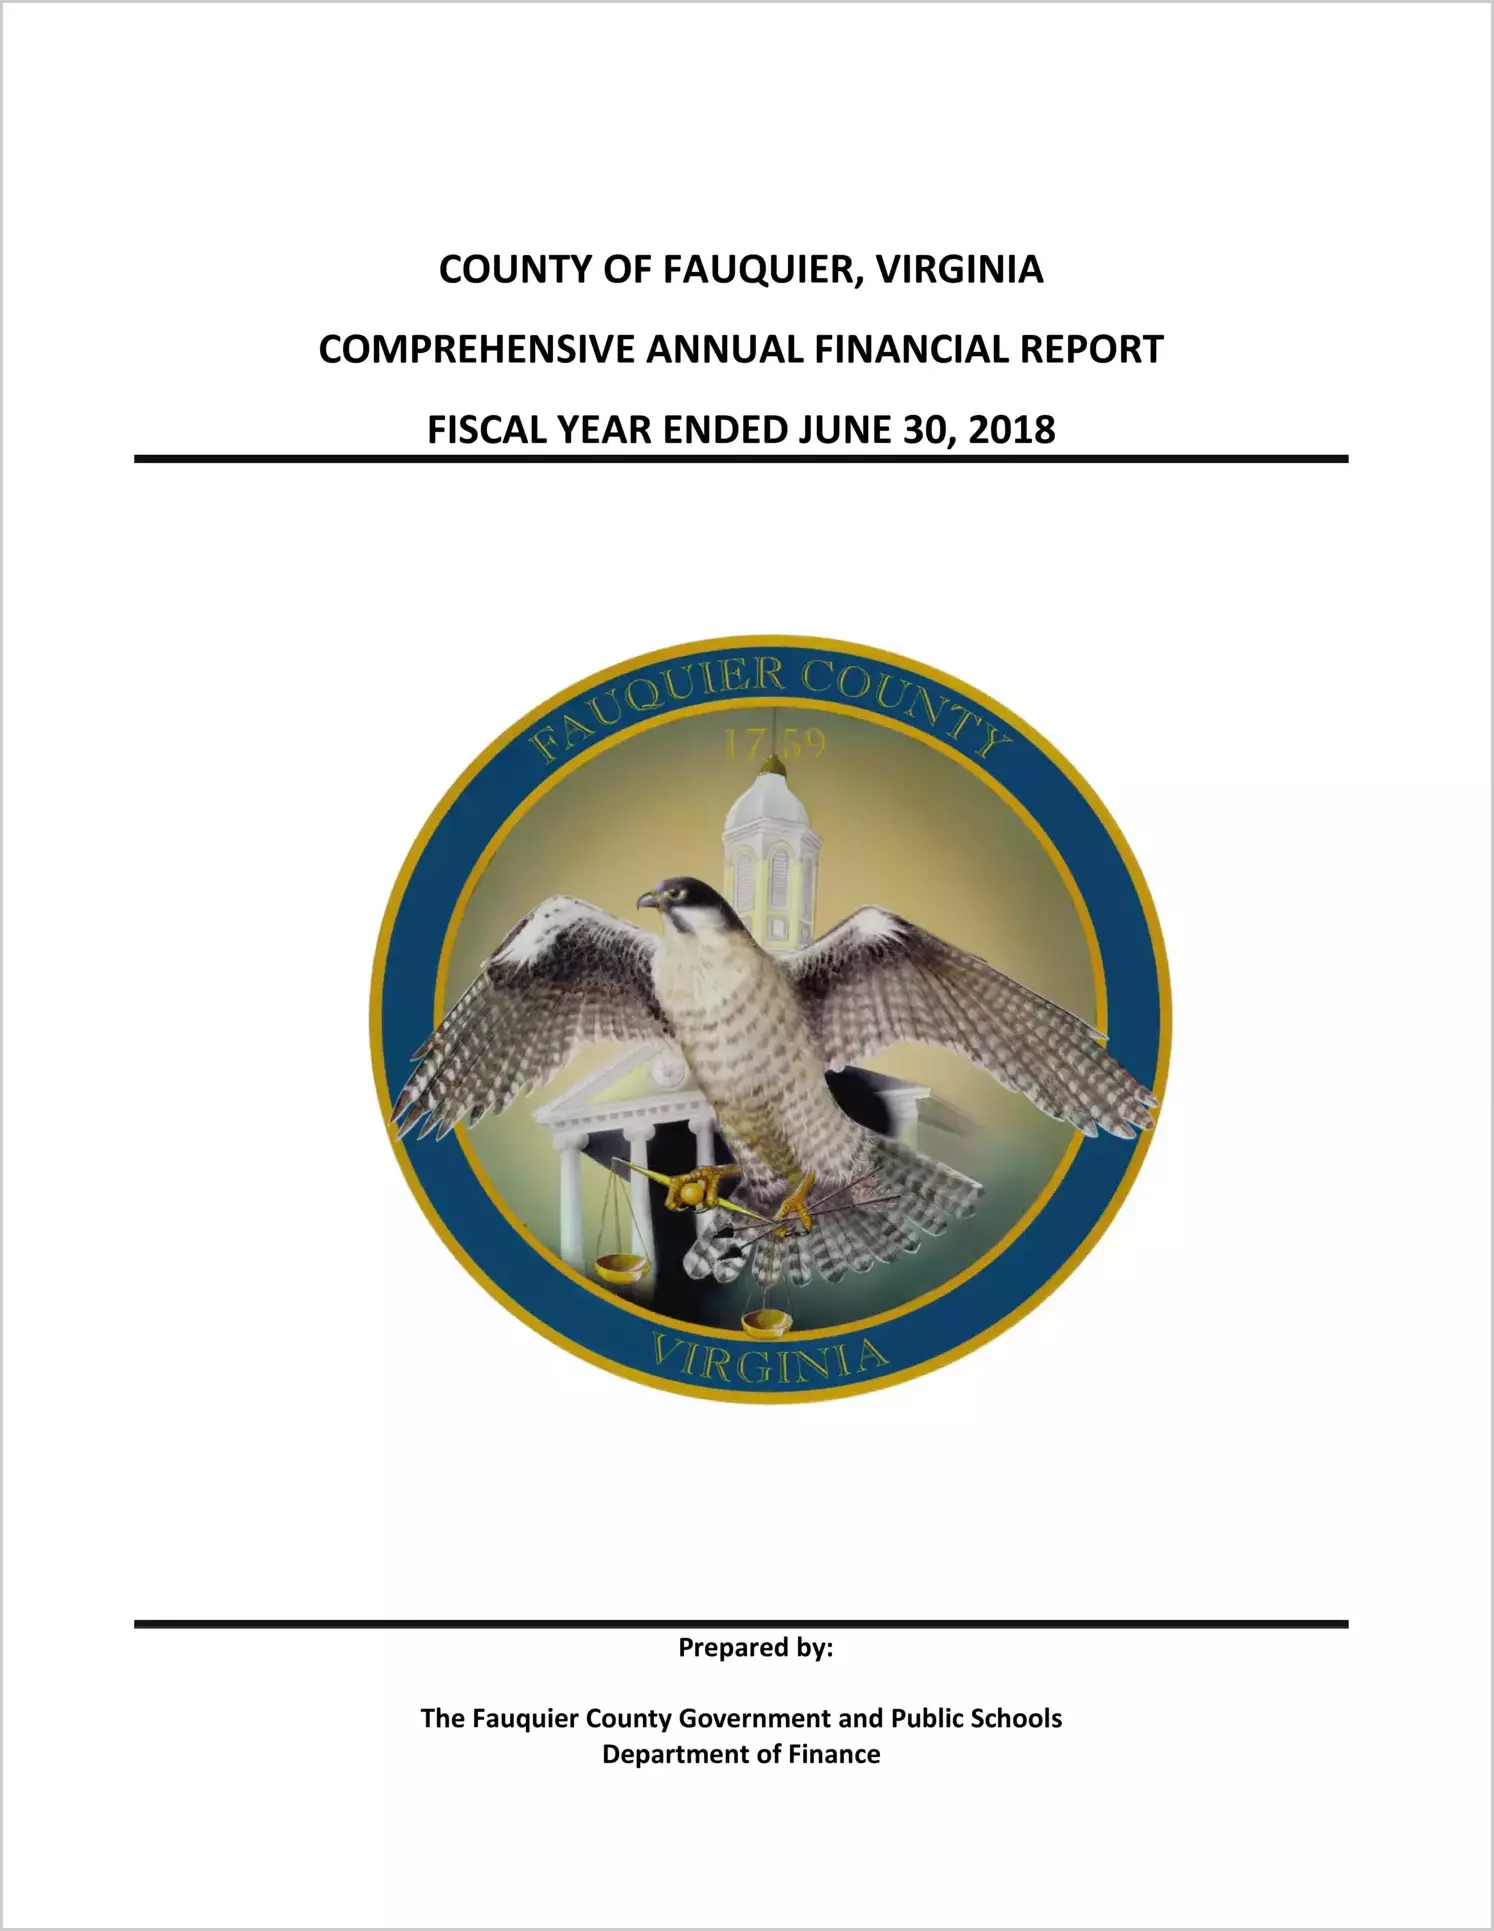 2018 Annual Financial Report for County of Fauquier